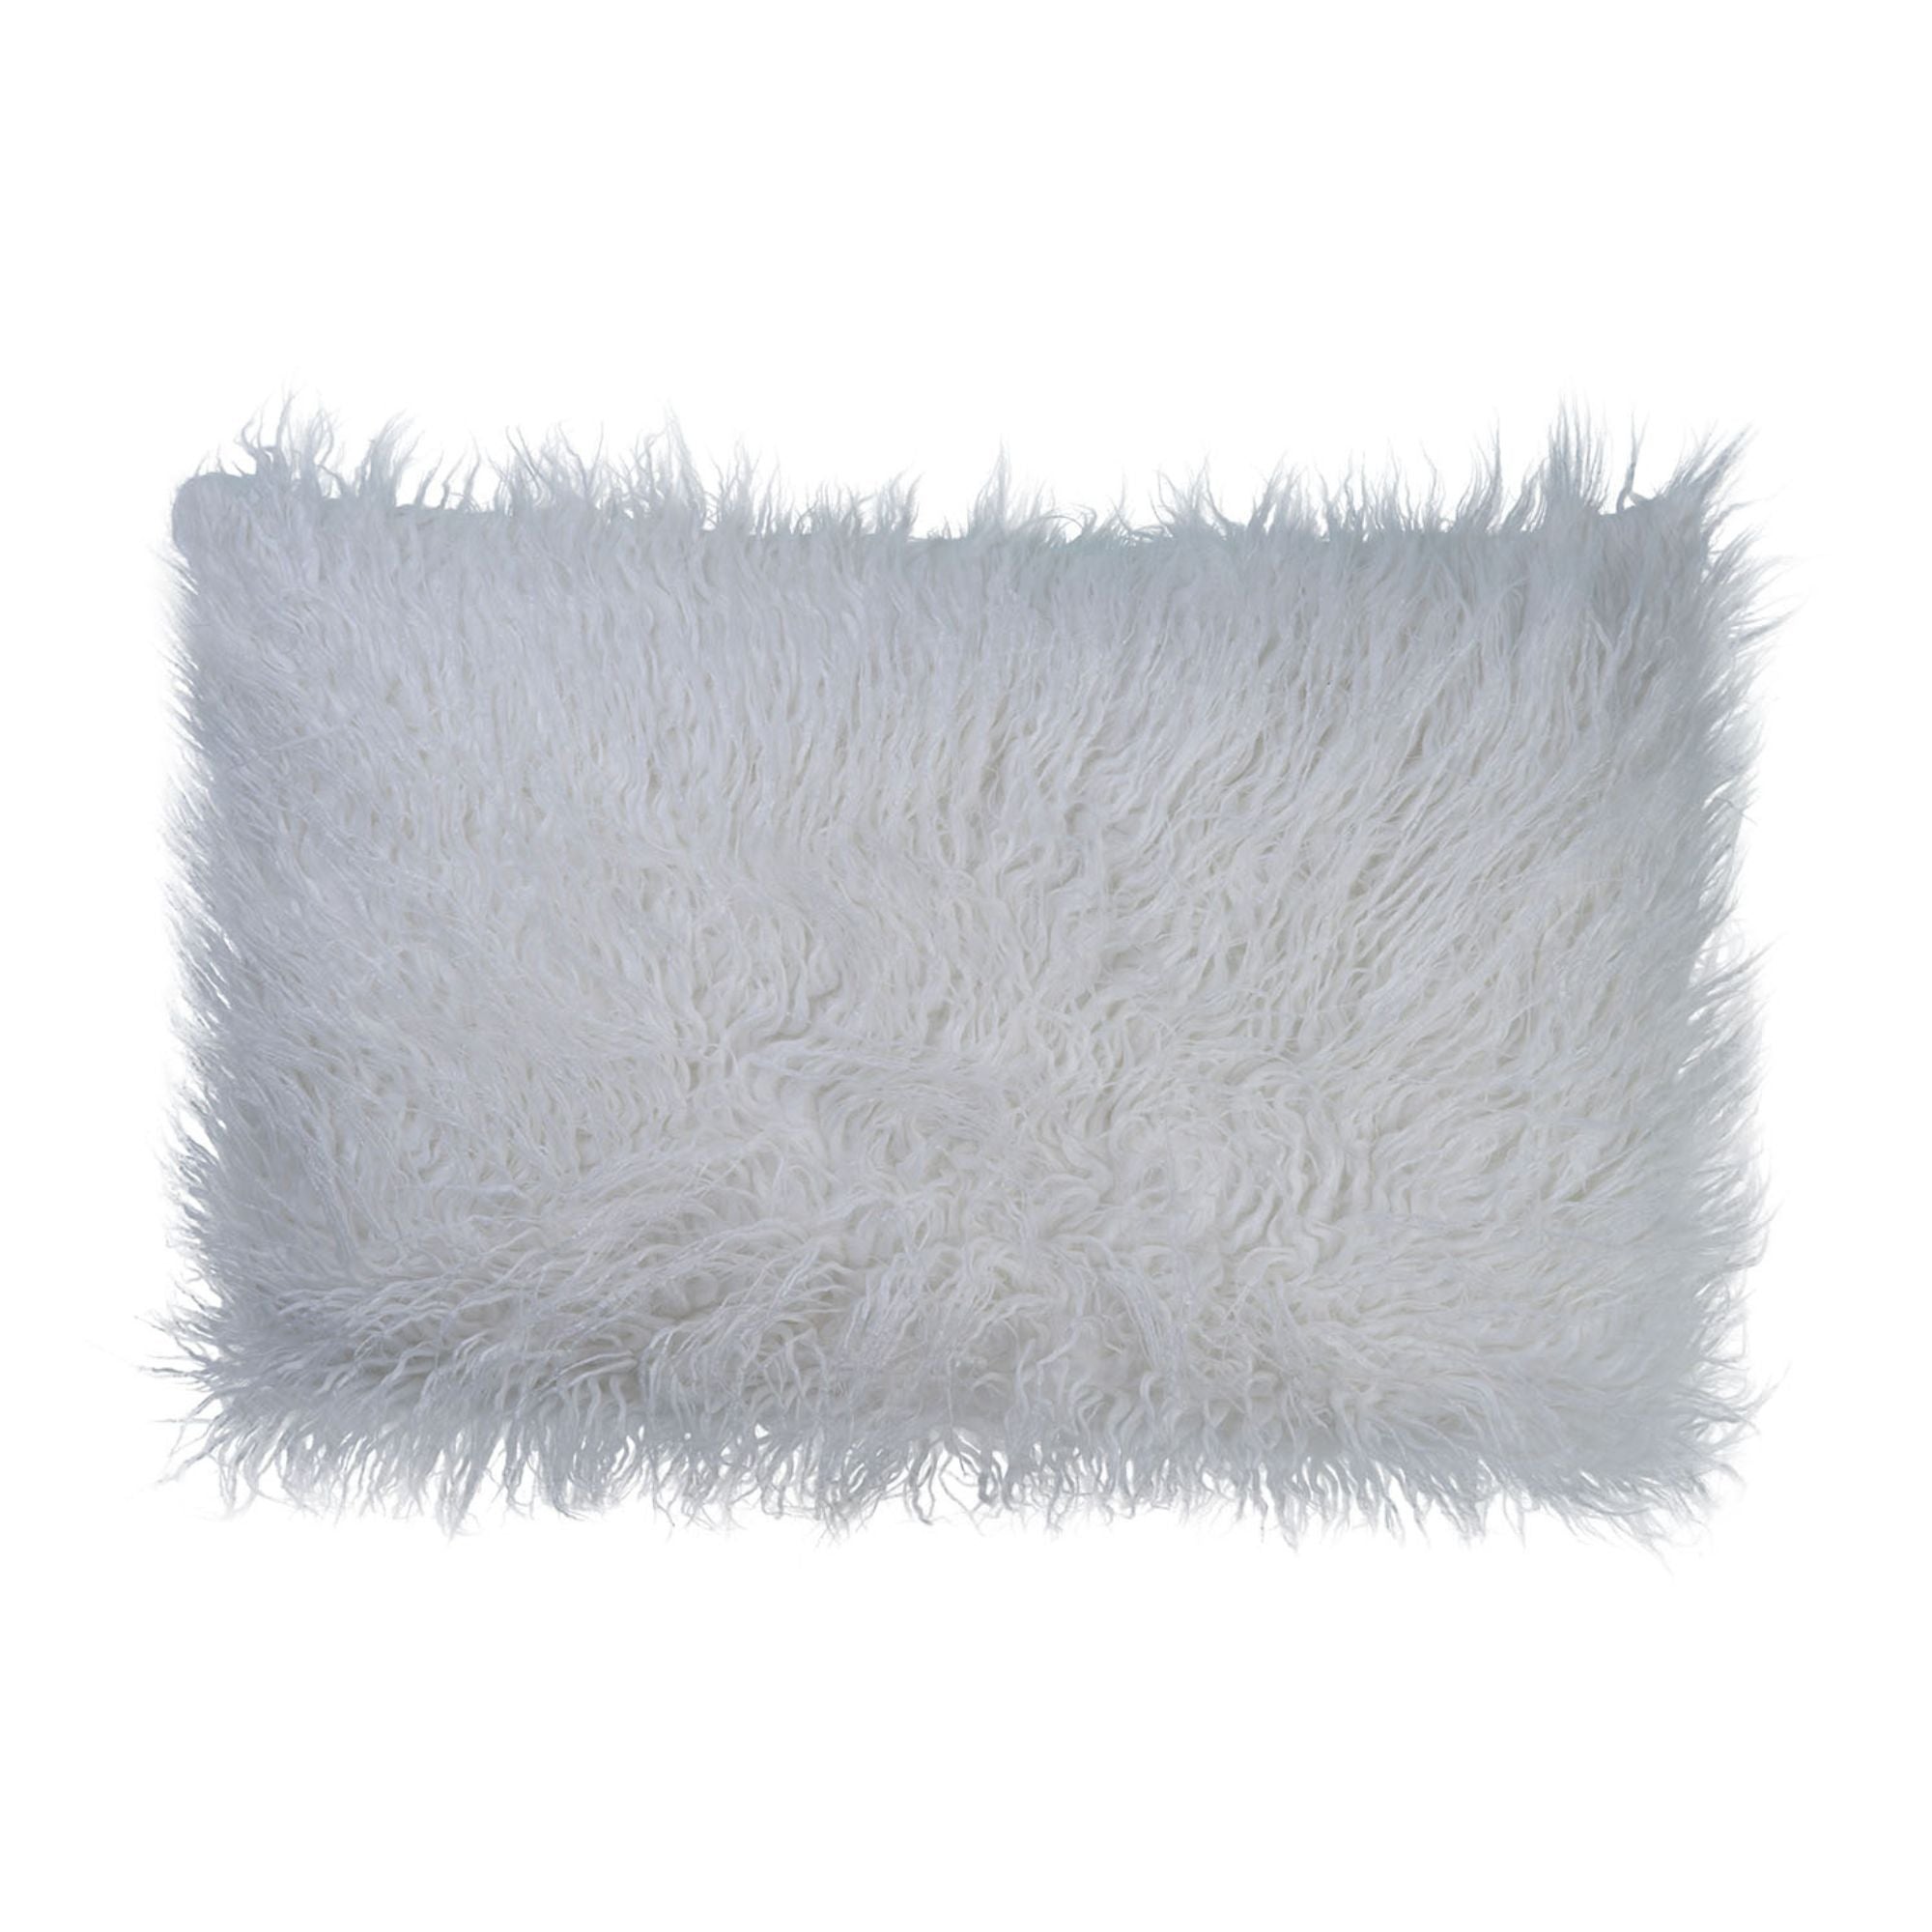 Warm White Long Hair Luxury Faux Fur Designer Cushion with Integrated 2 Litre Eco Hot Water Bottle